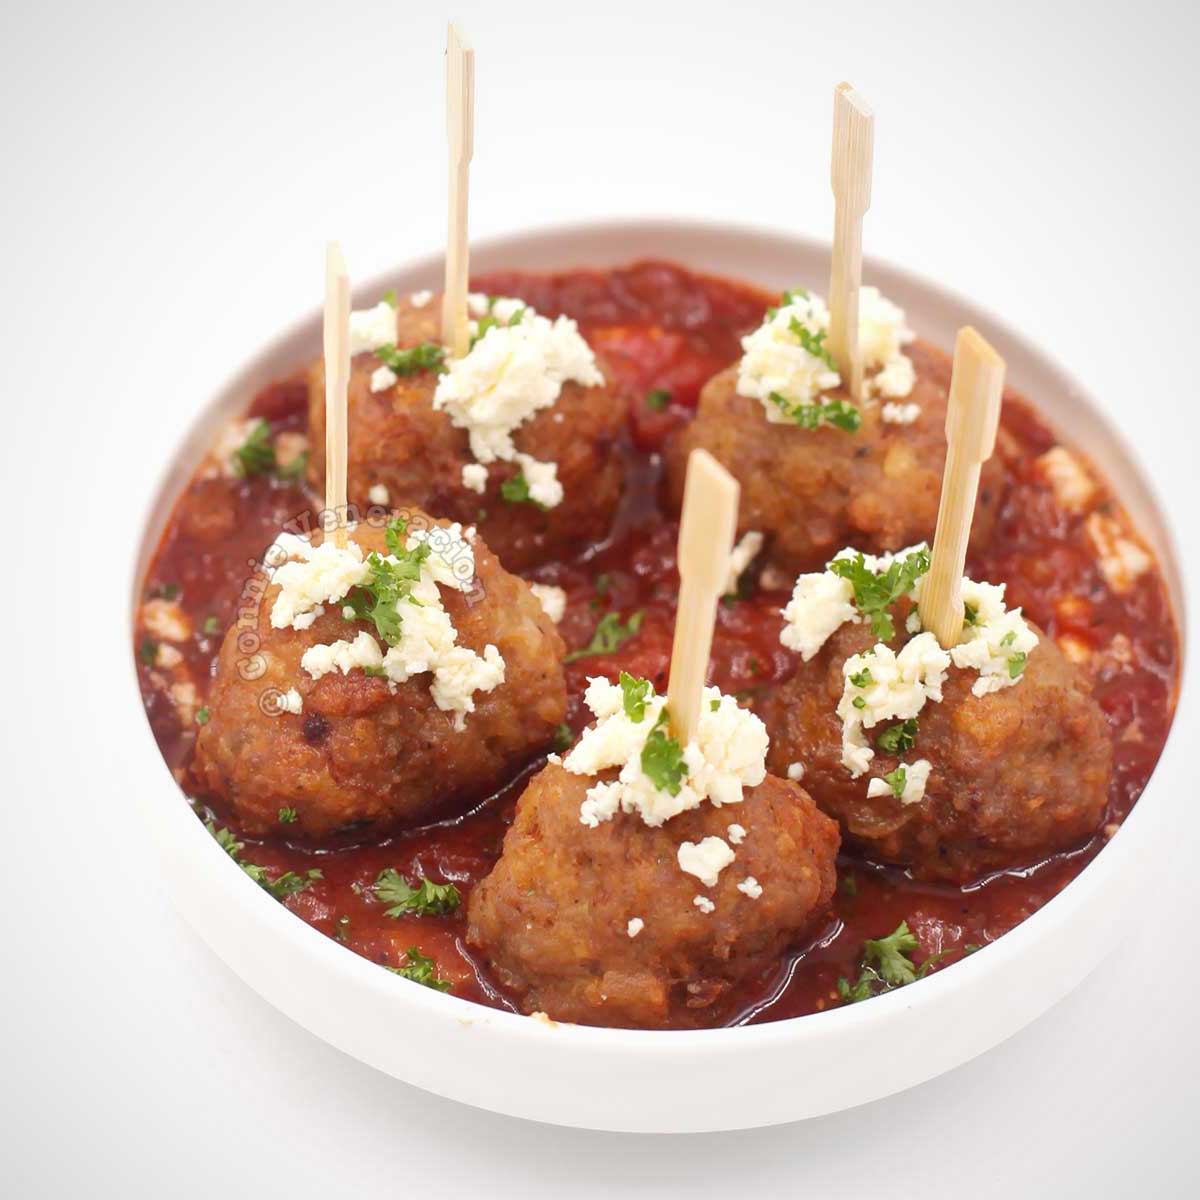 Spanish-style meatballs topped with crumbled feta